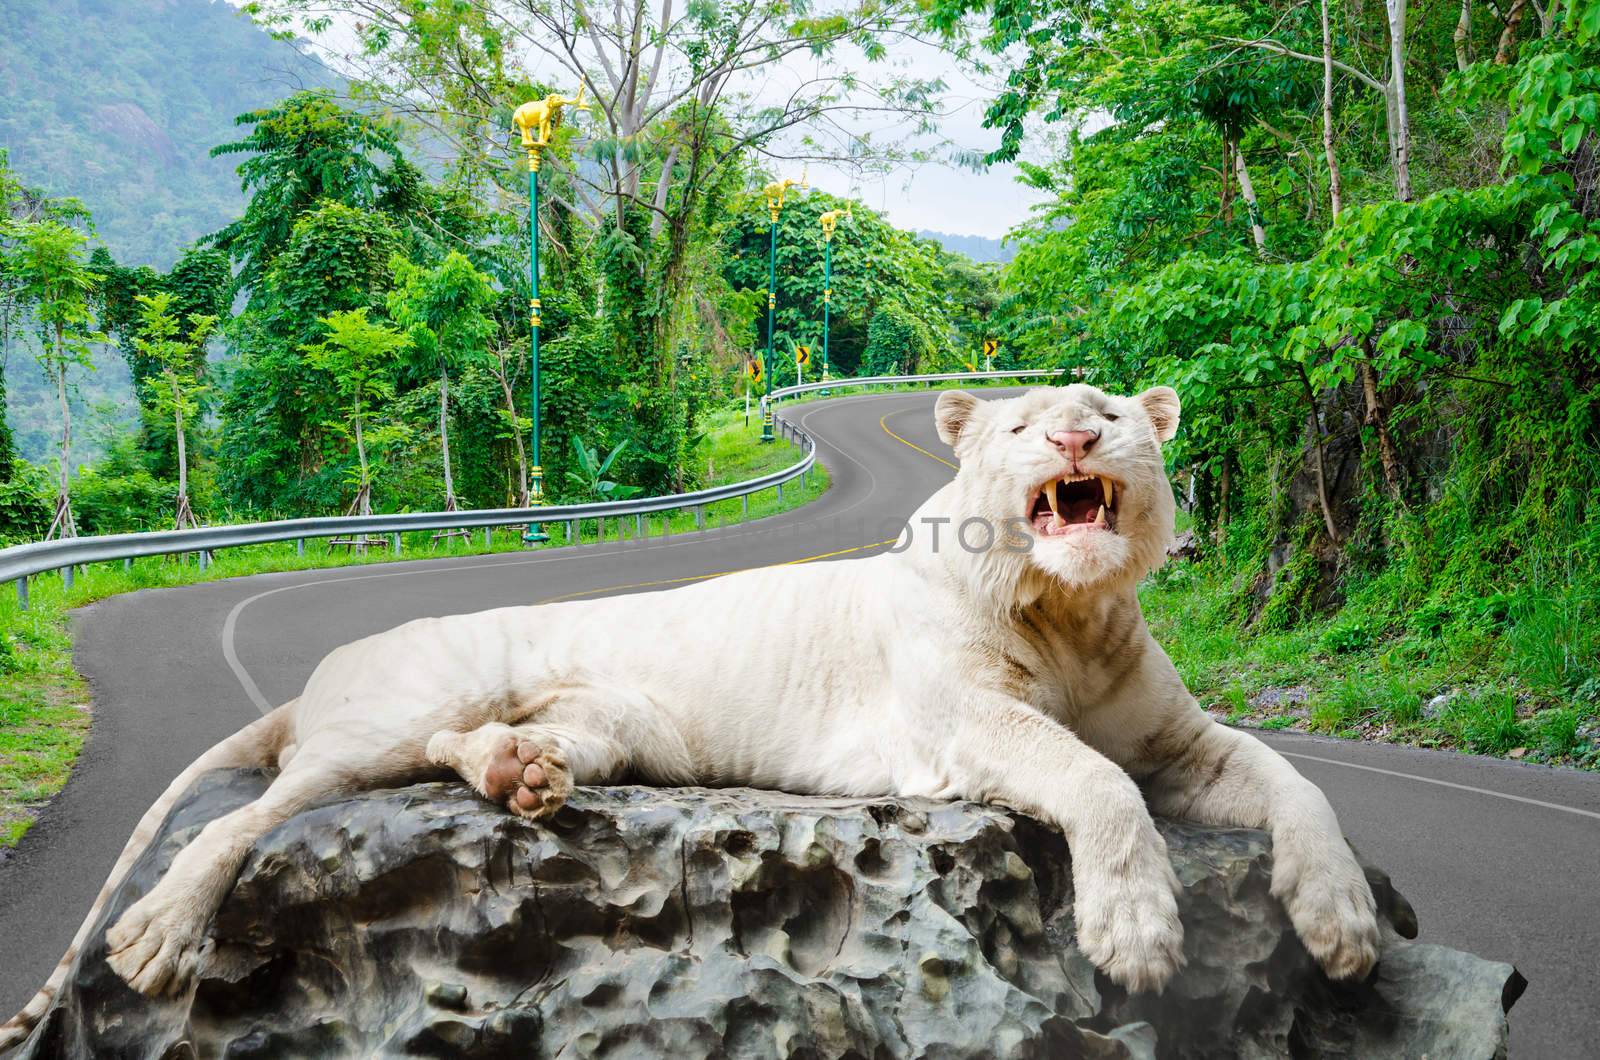 The white tiger growls. big canines. On nature background.